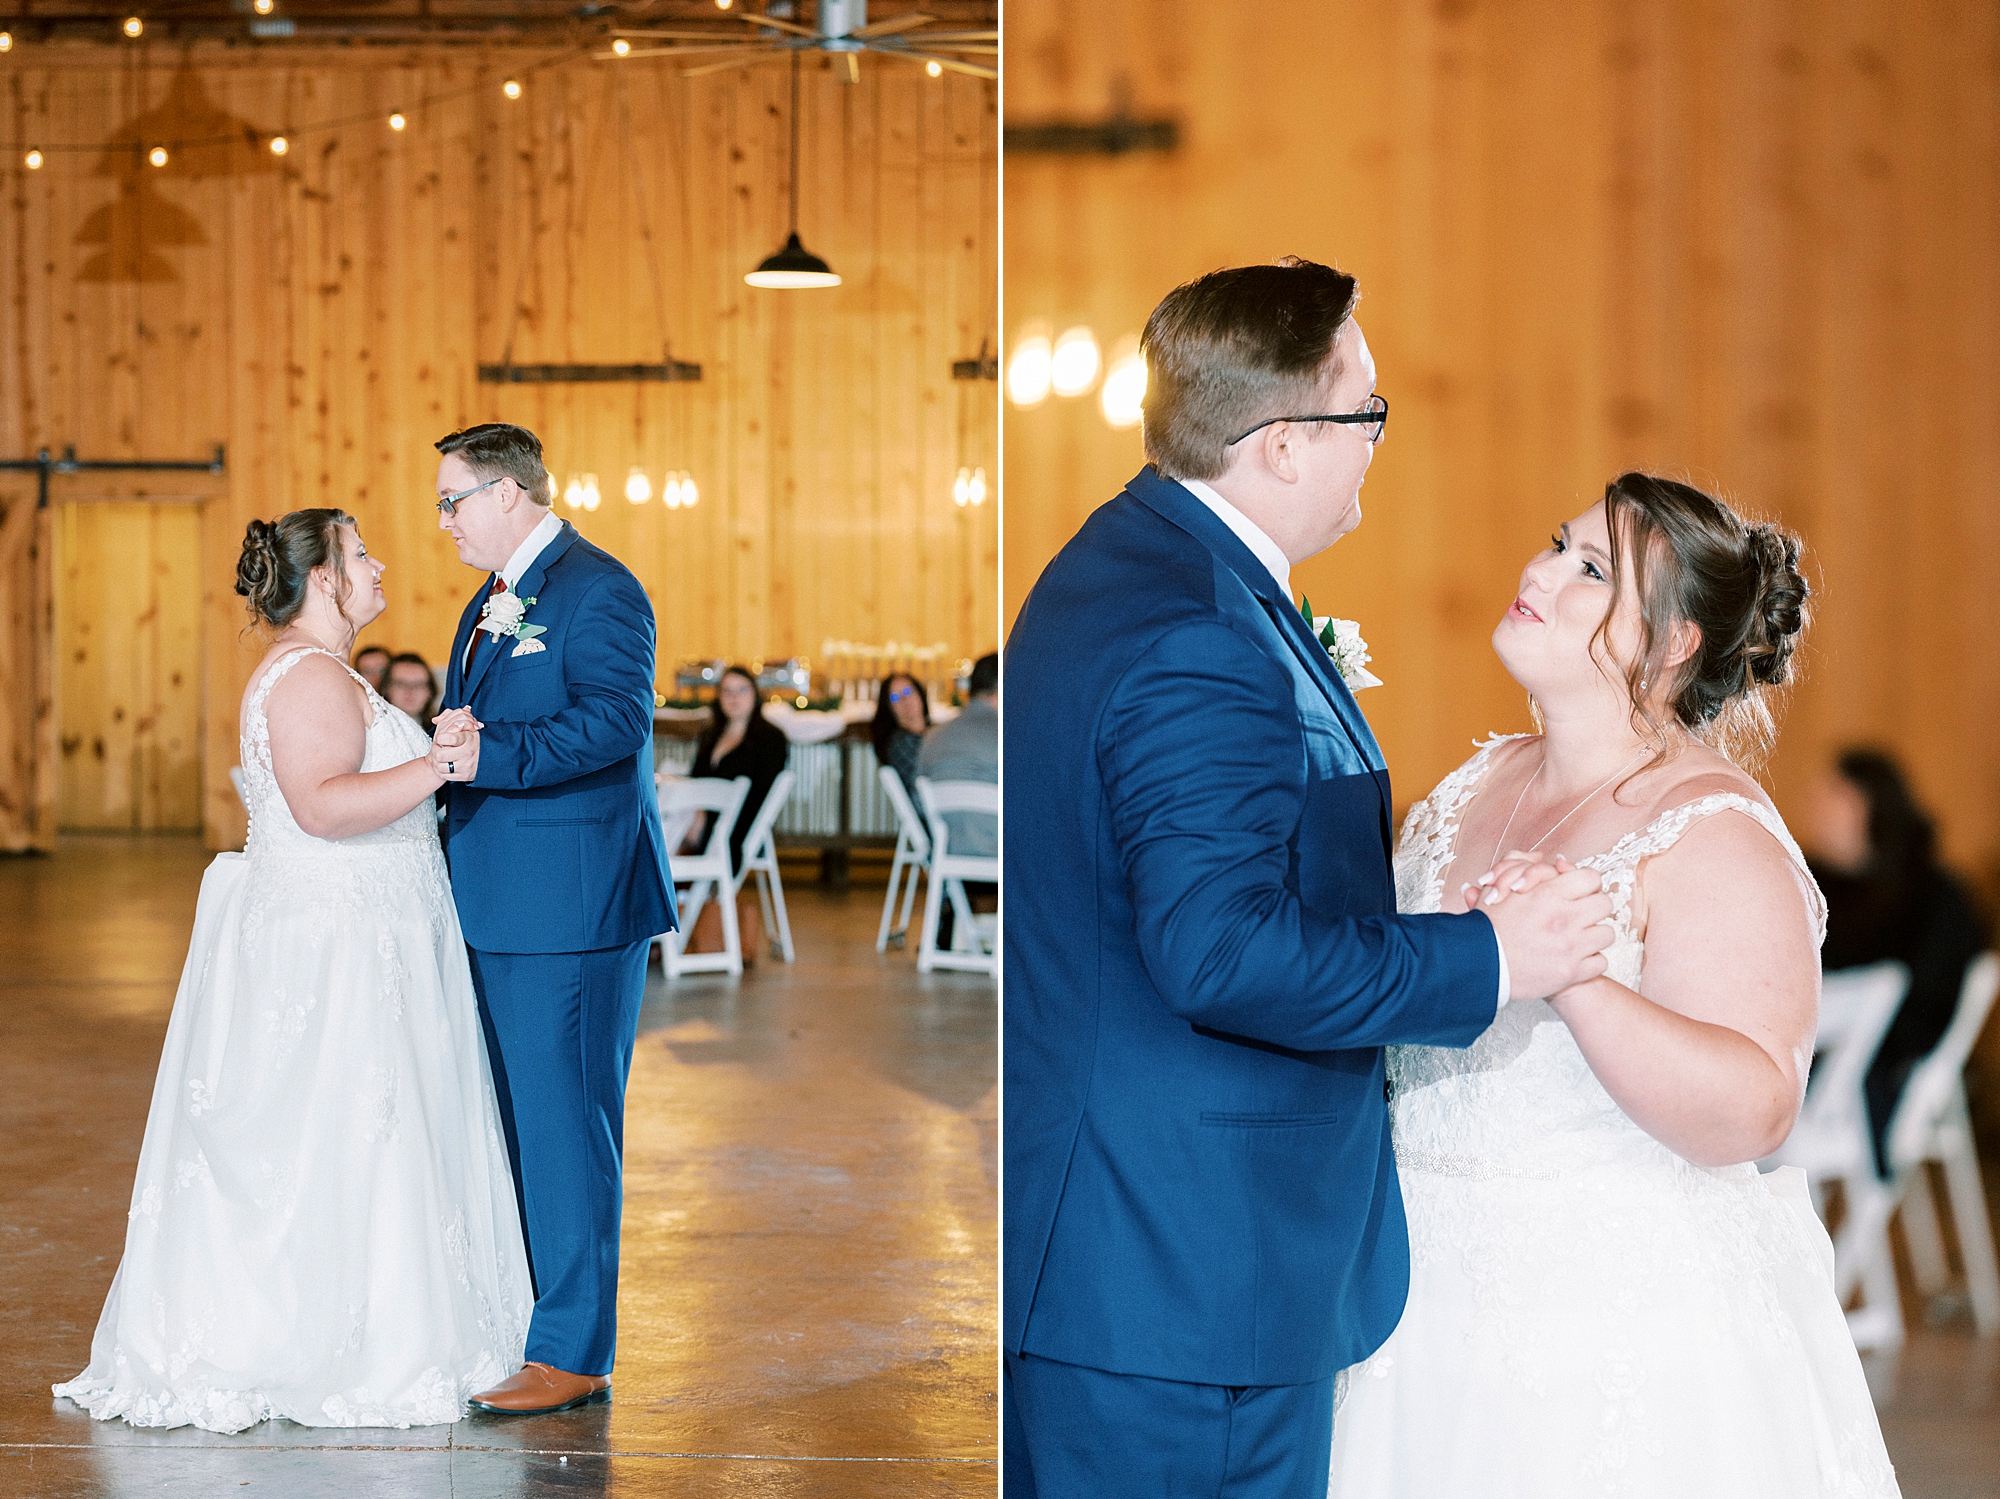 bride smiles up at groom during first dance in barn at the Farm at Brusharbor